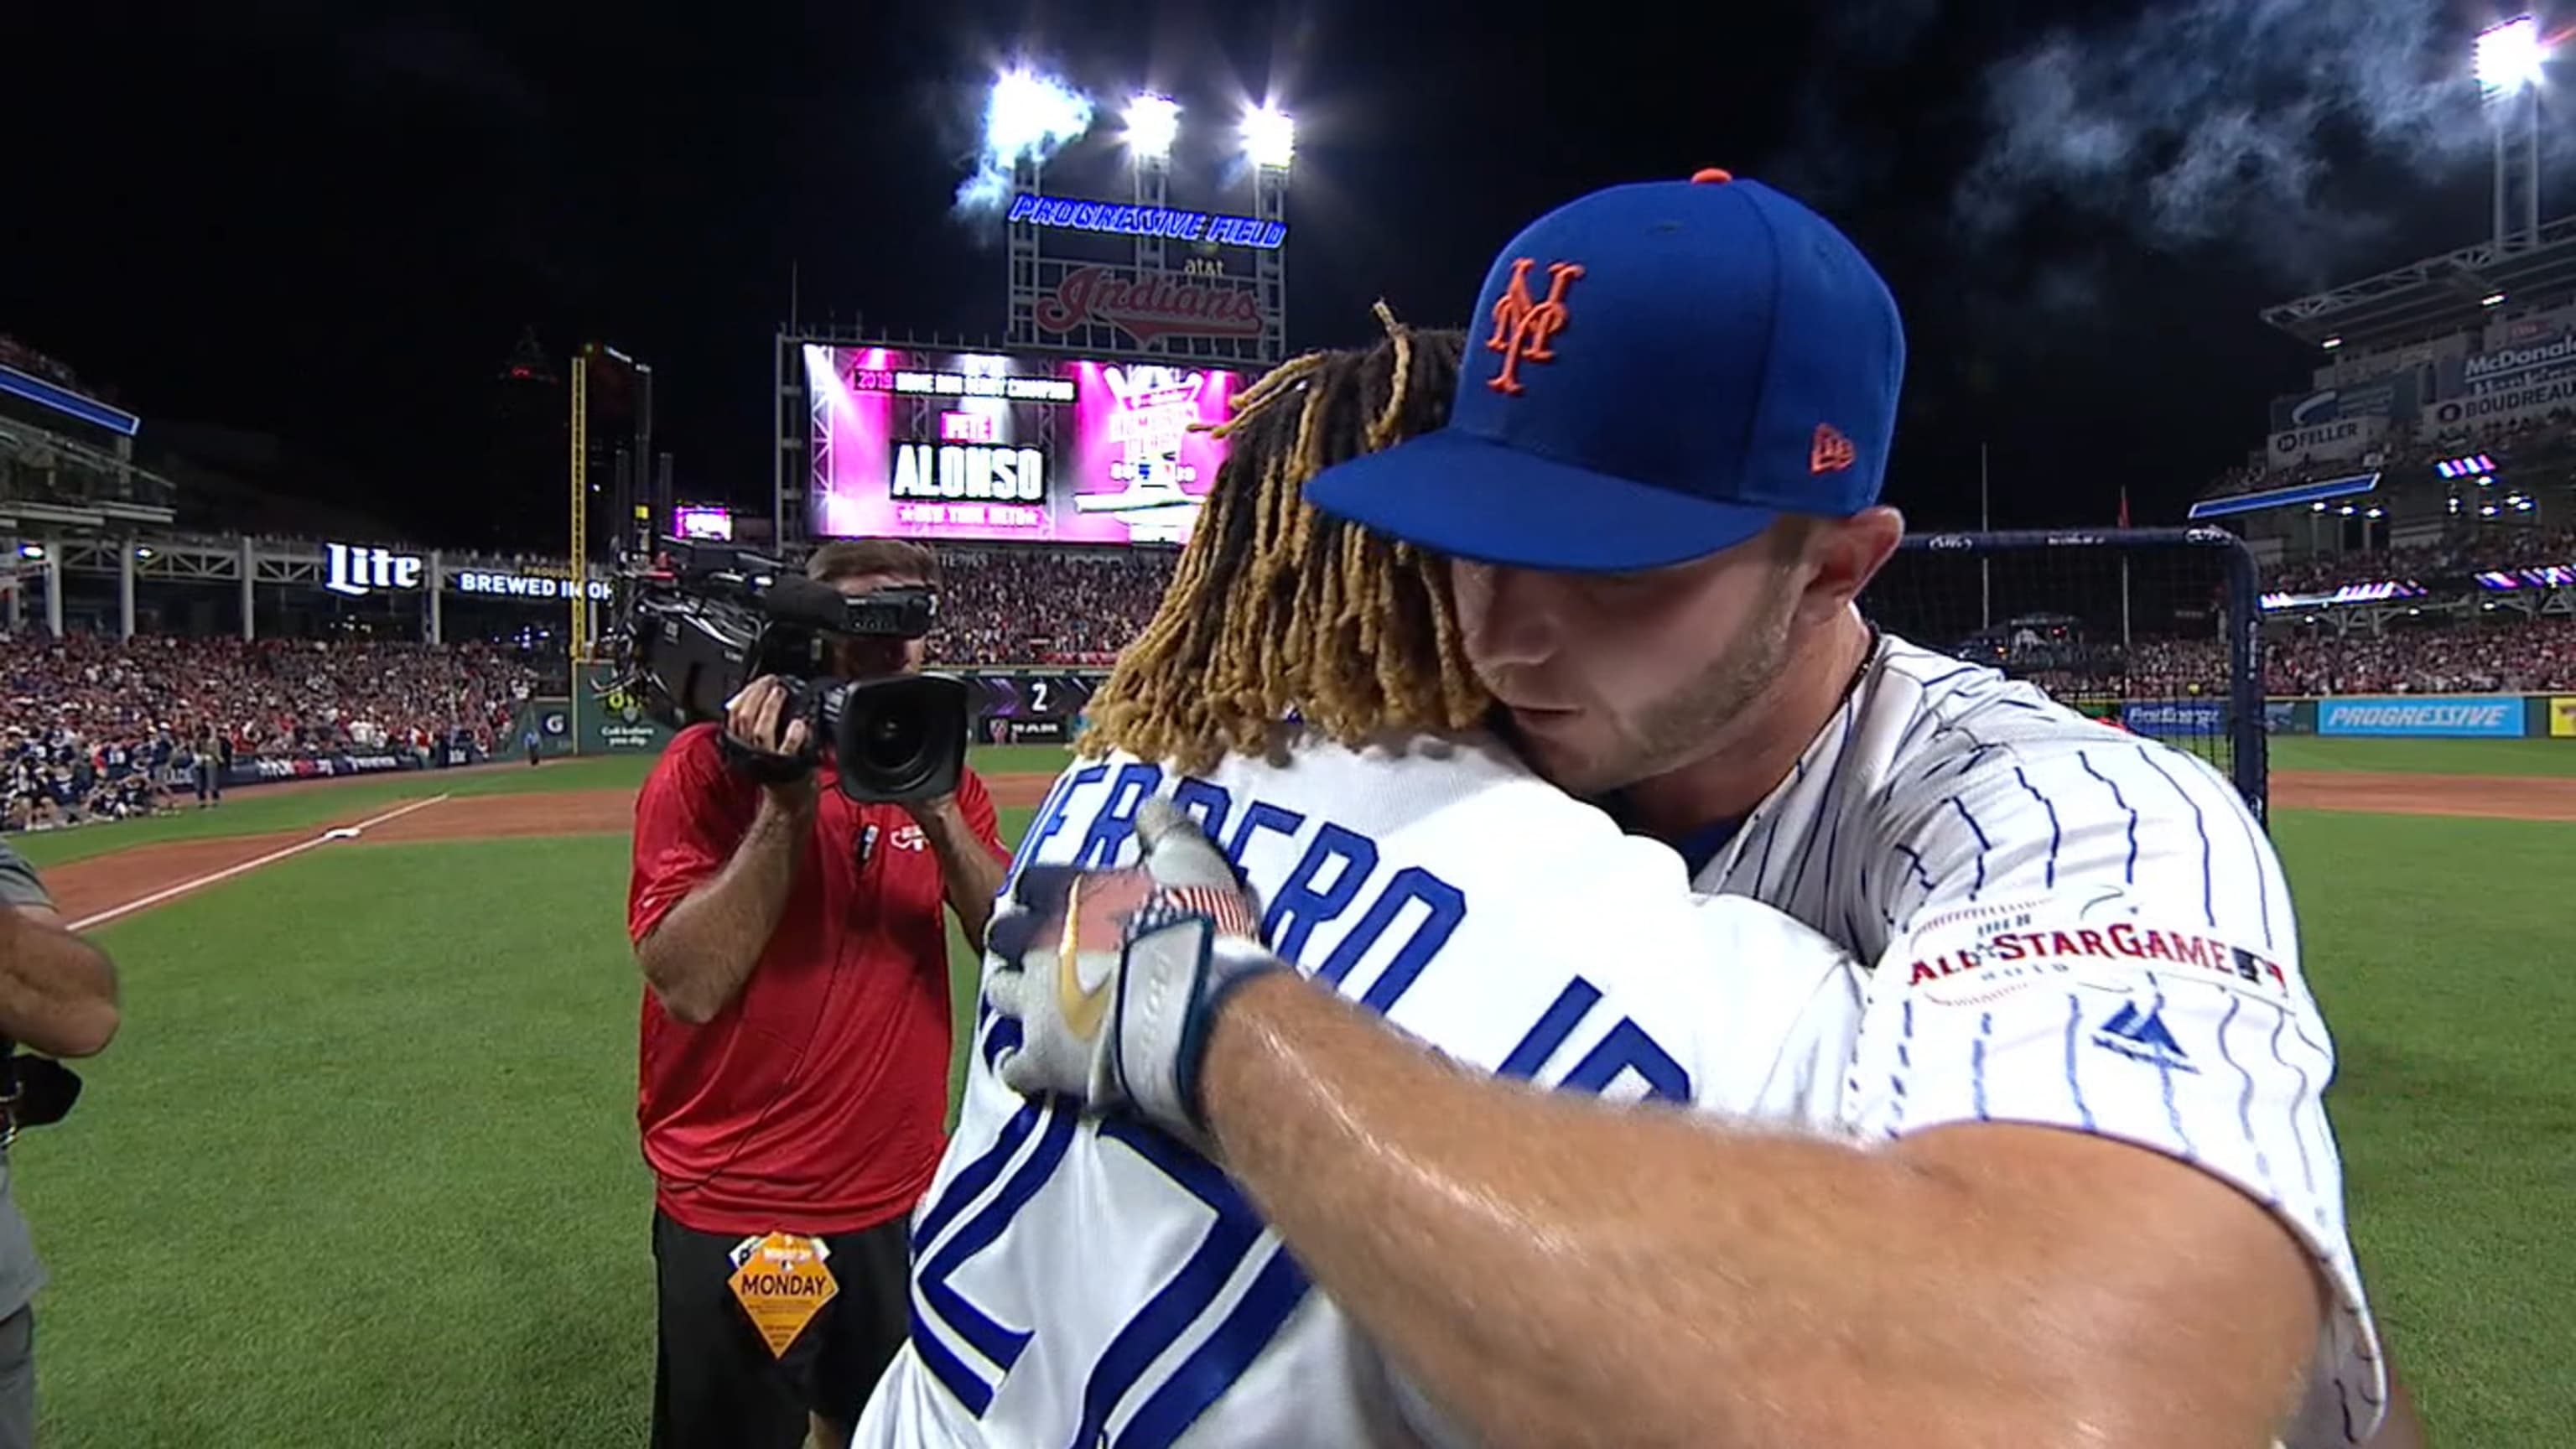 Pete Alonso wins 2019 Home Run Derby